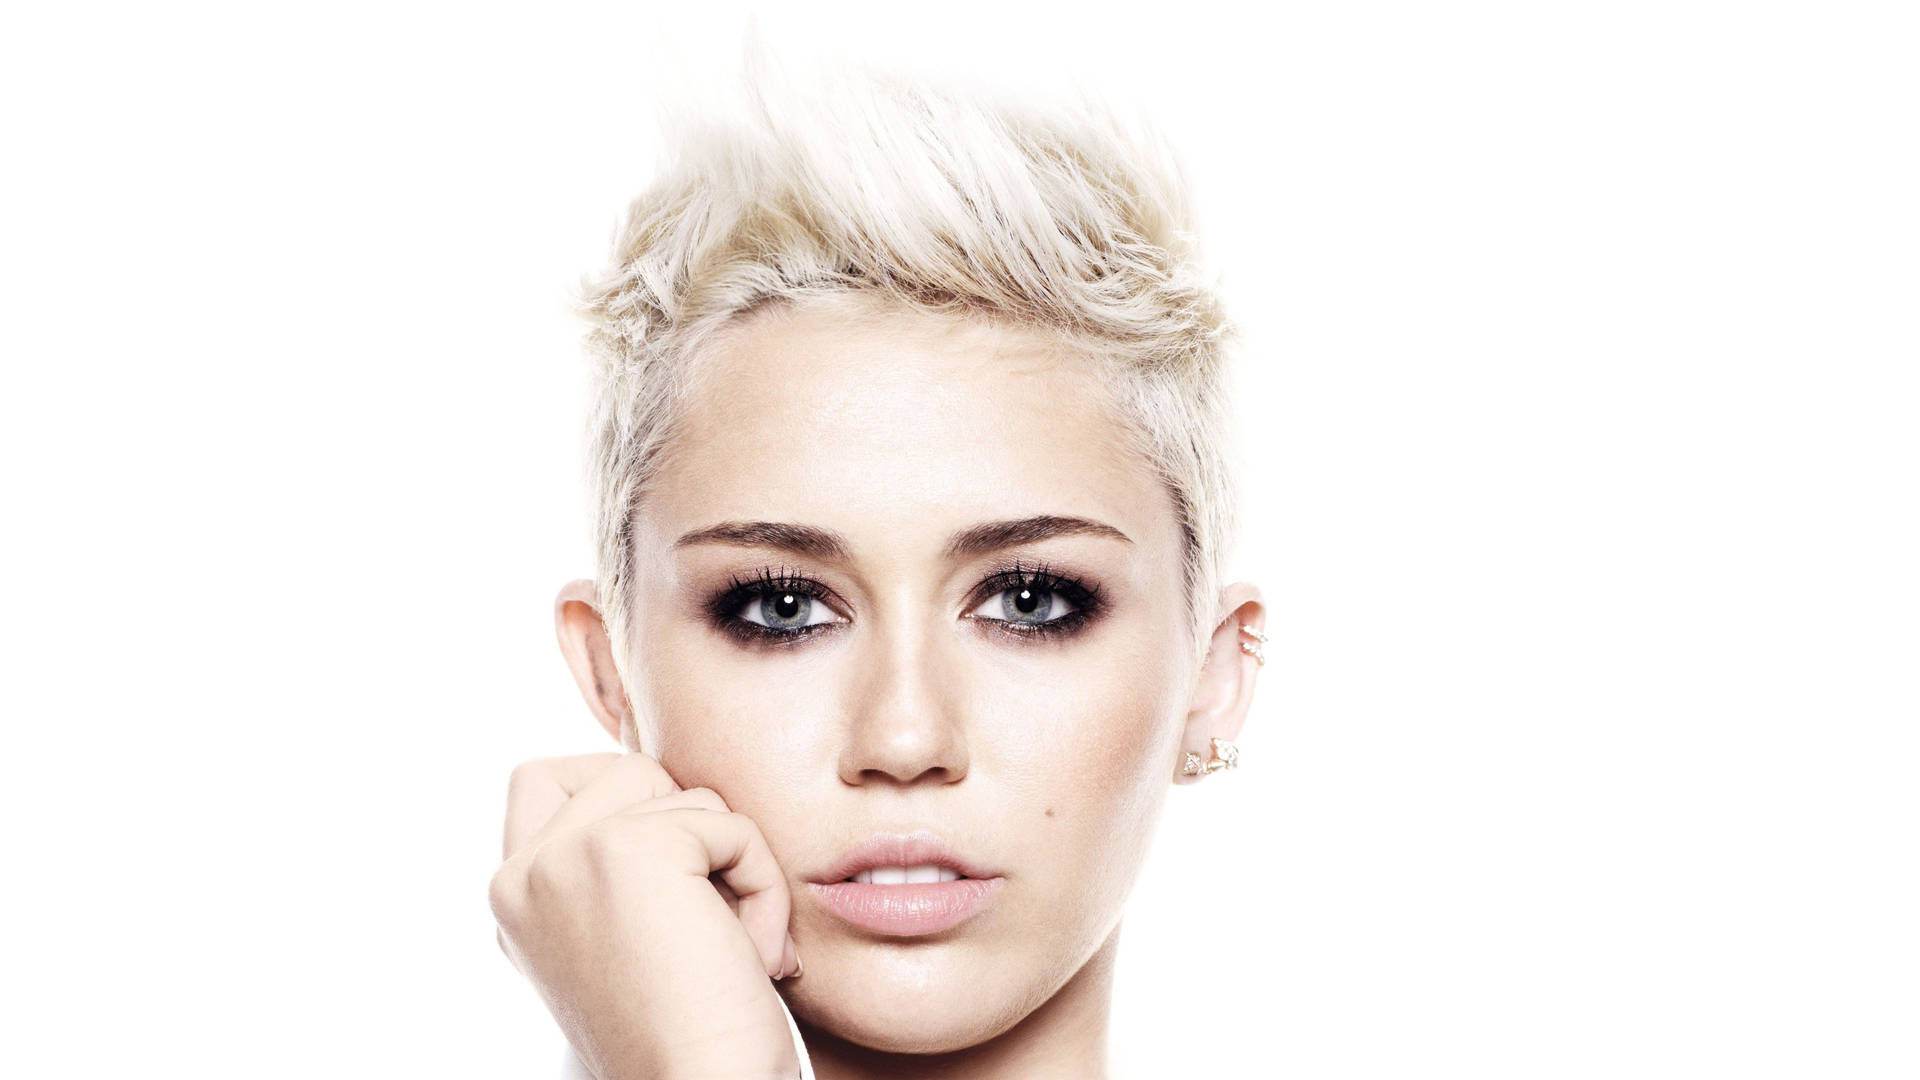 Miley Cyrus With Edgy Pixie Cut Background